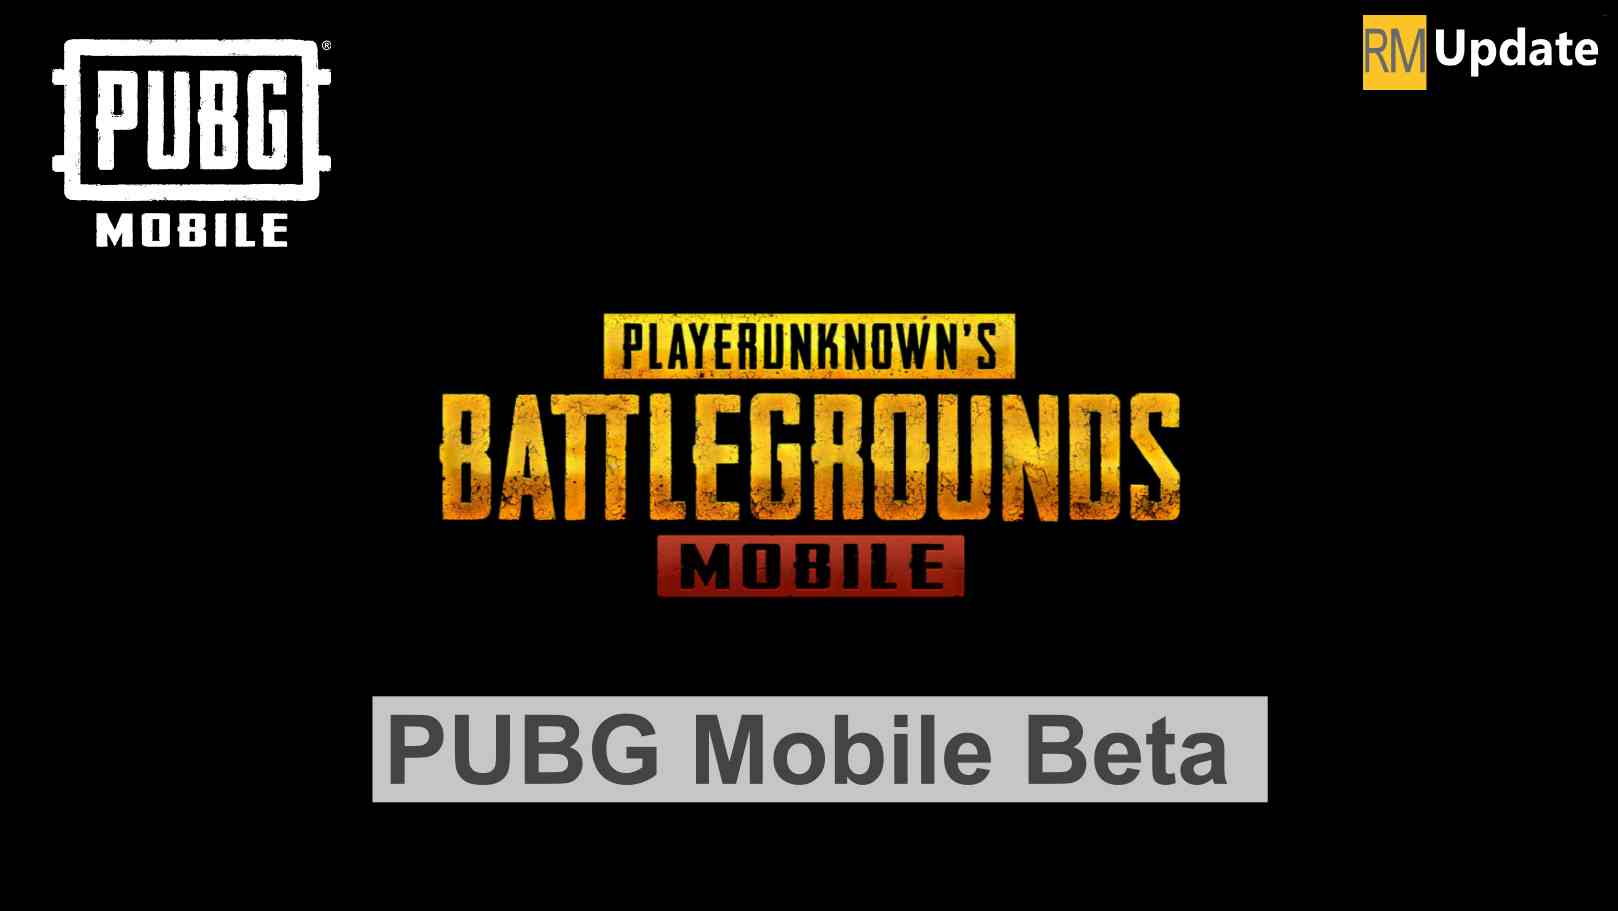 PubG Mobile 1.4 Beta Apk: How to Download and What New in this Beta Version